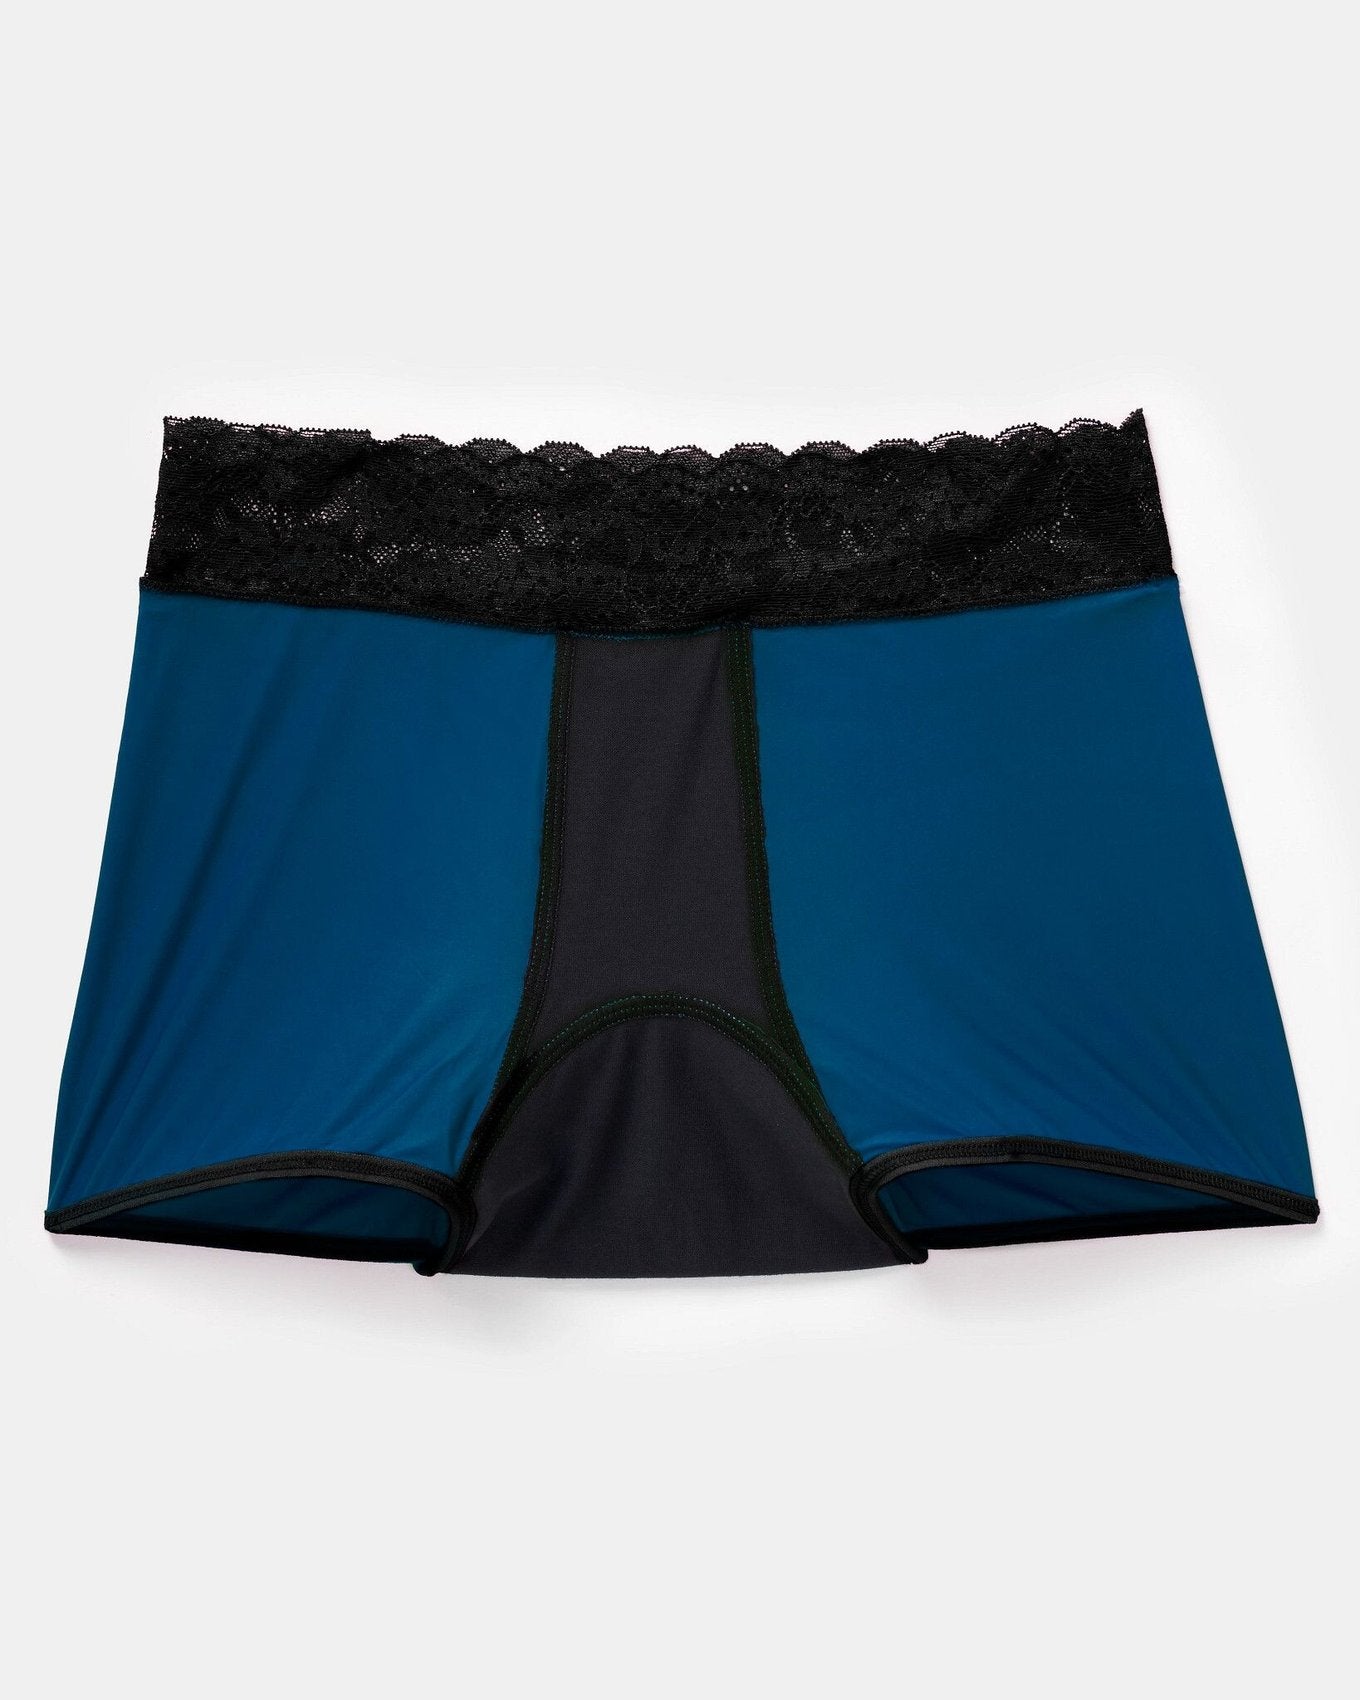 Joyja Emily period-proof panty in color Classic Blue and shape shortie